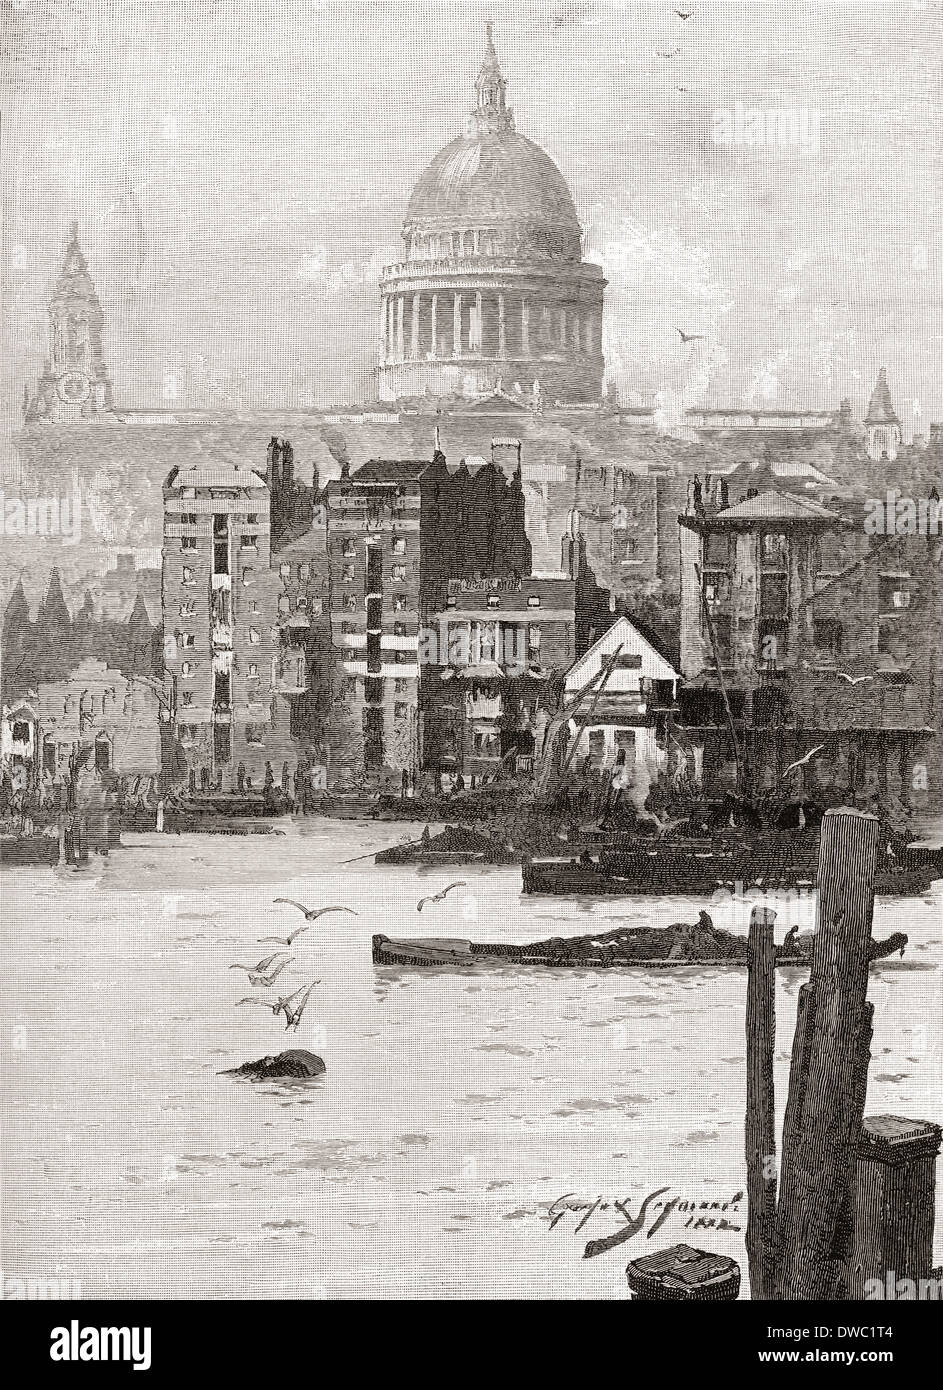 St. Paul's Cathedral from the Surrey shore, London, England in the 19th century. Stock Photo